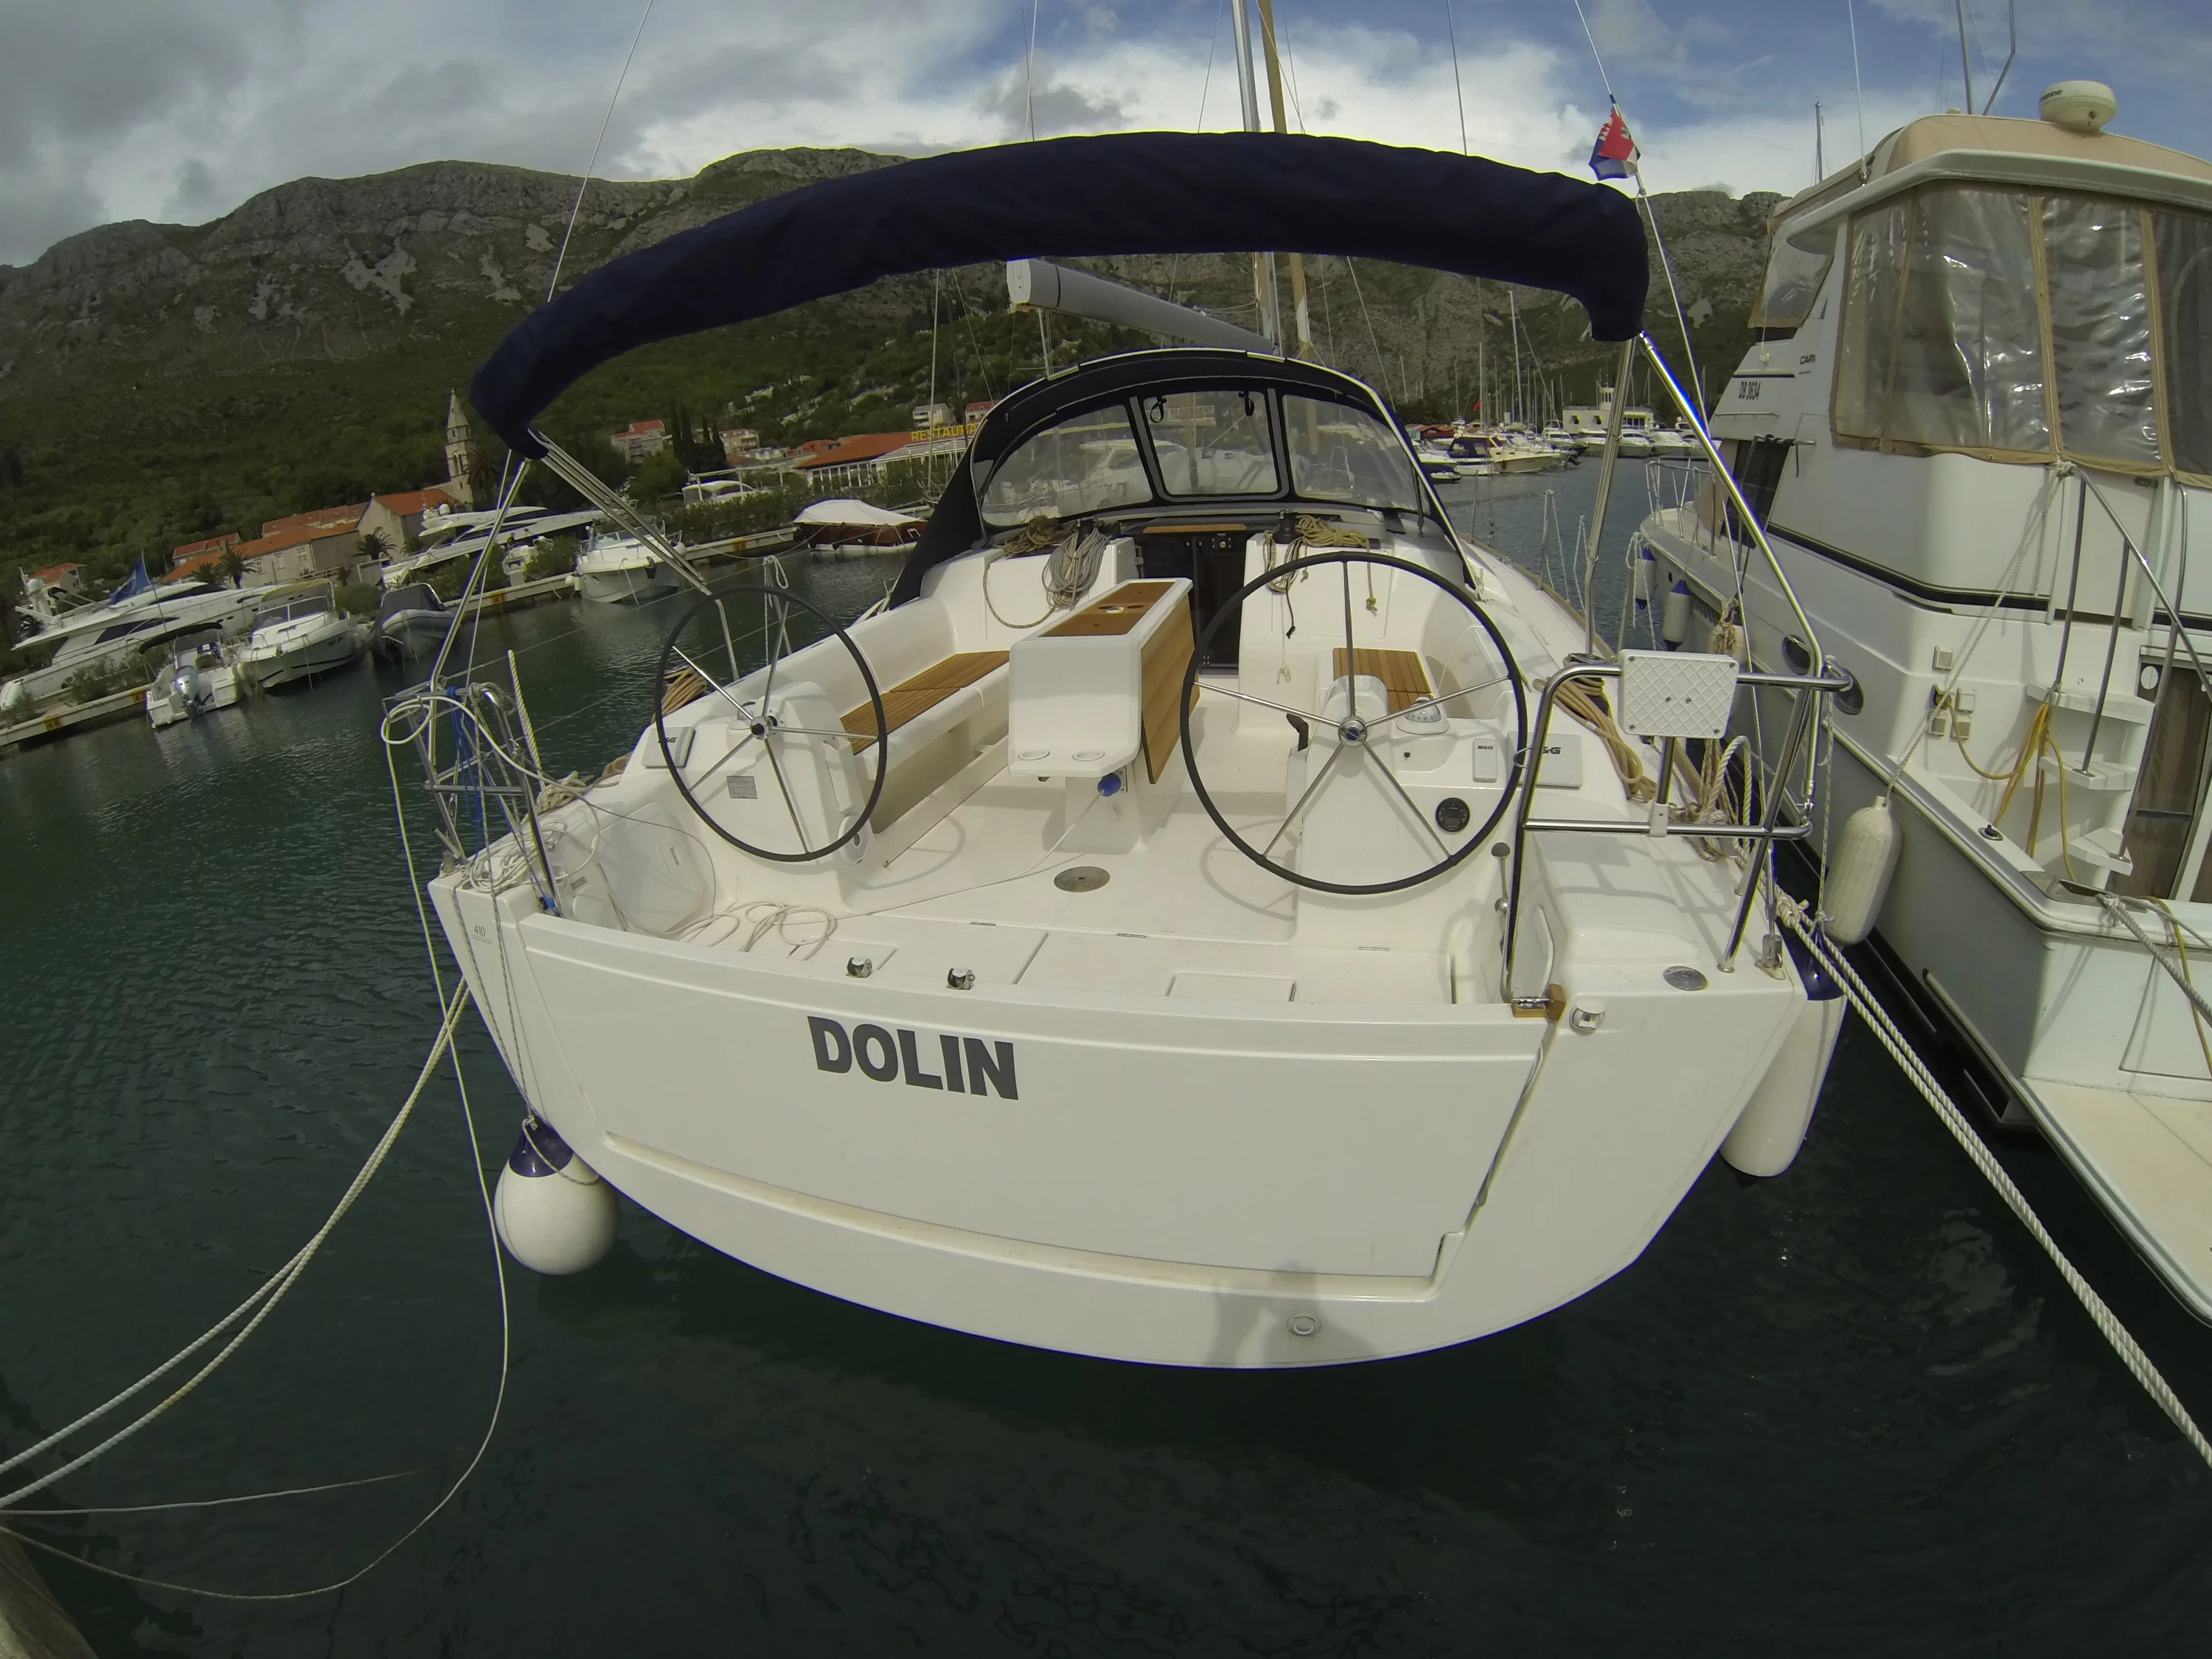 Dufour 410 Grand Large (Dolin) Main image - 0